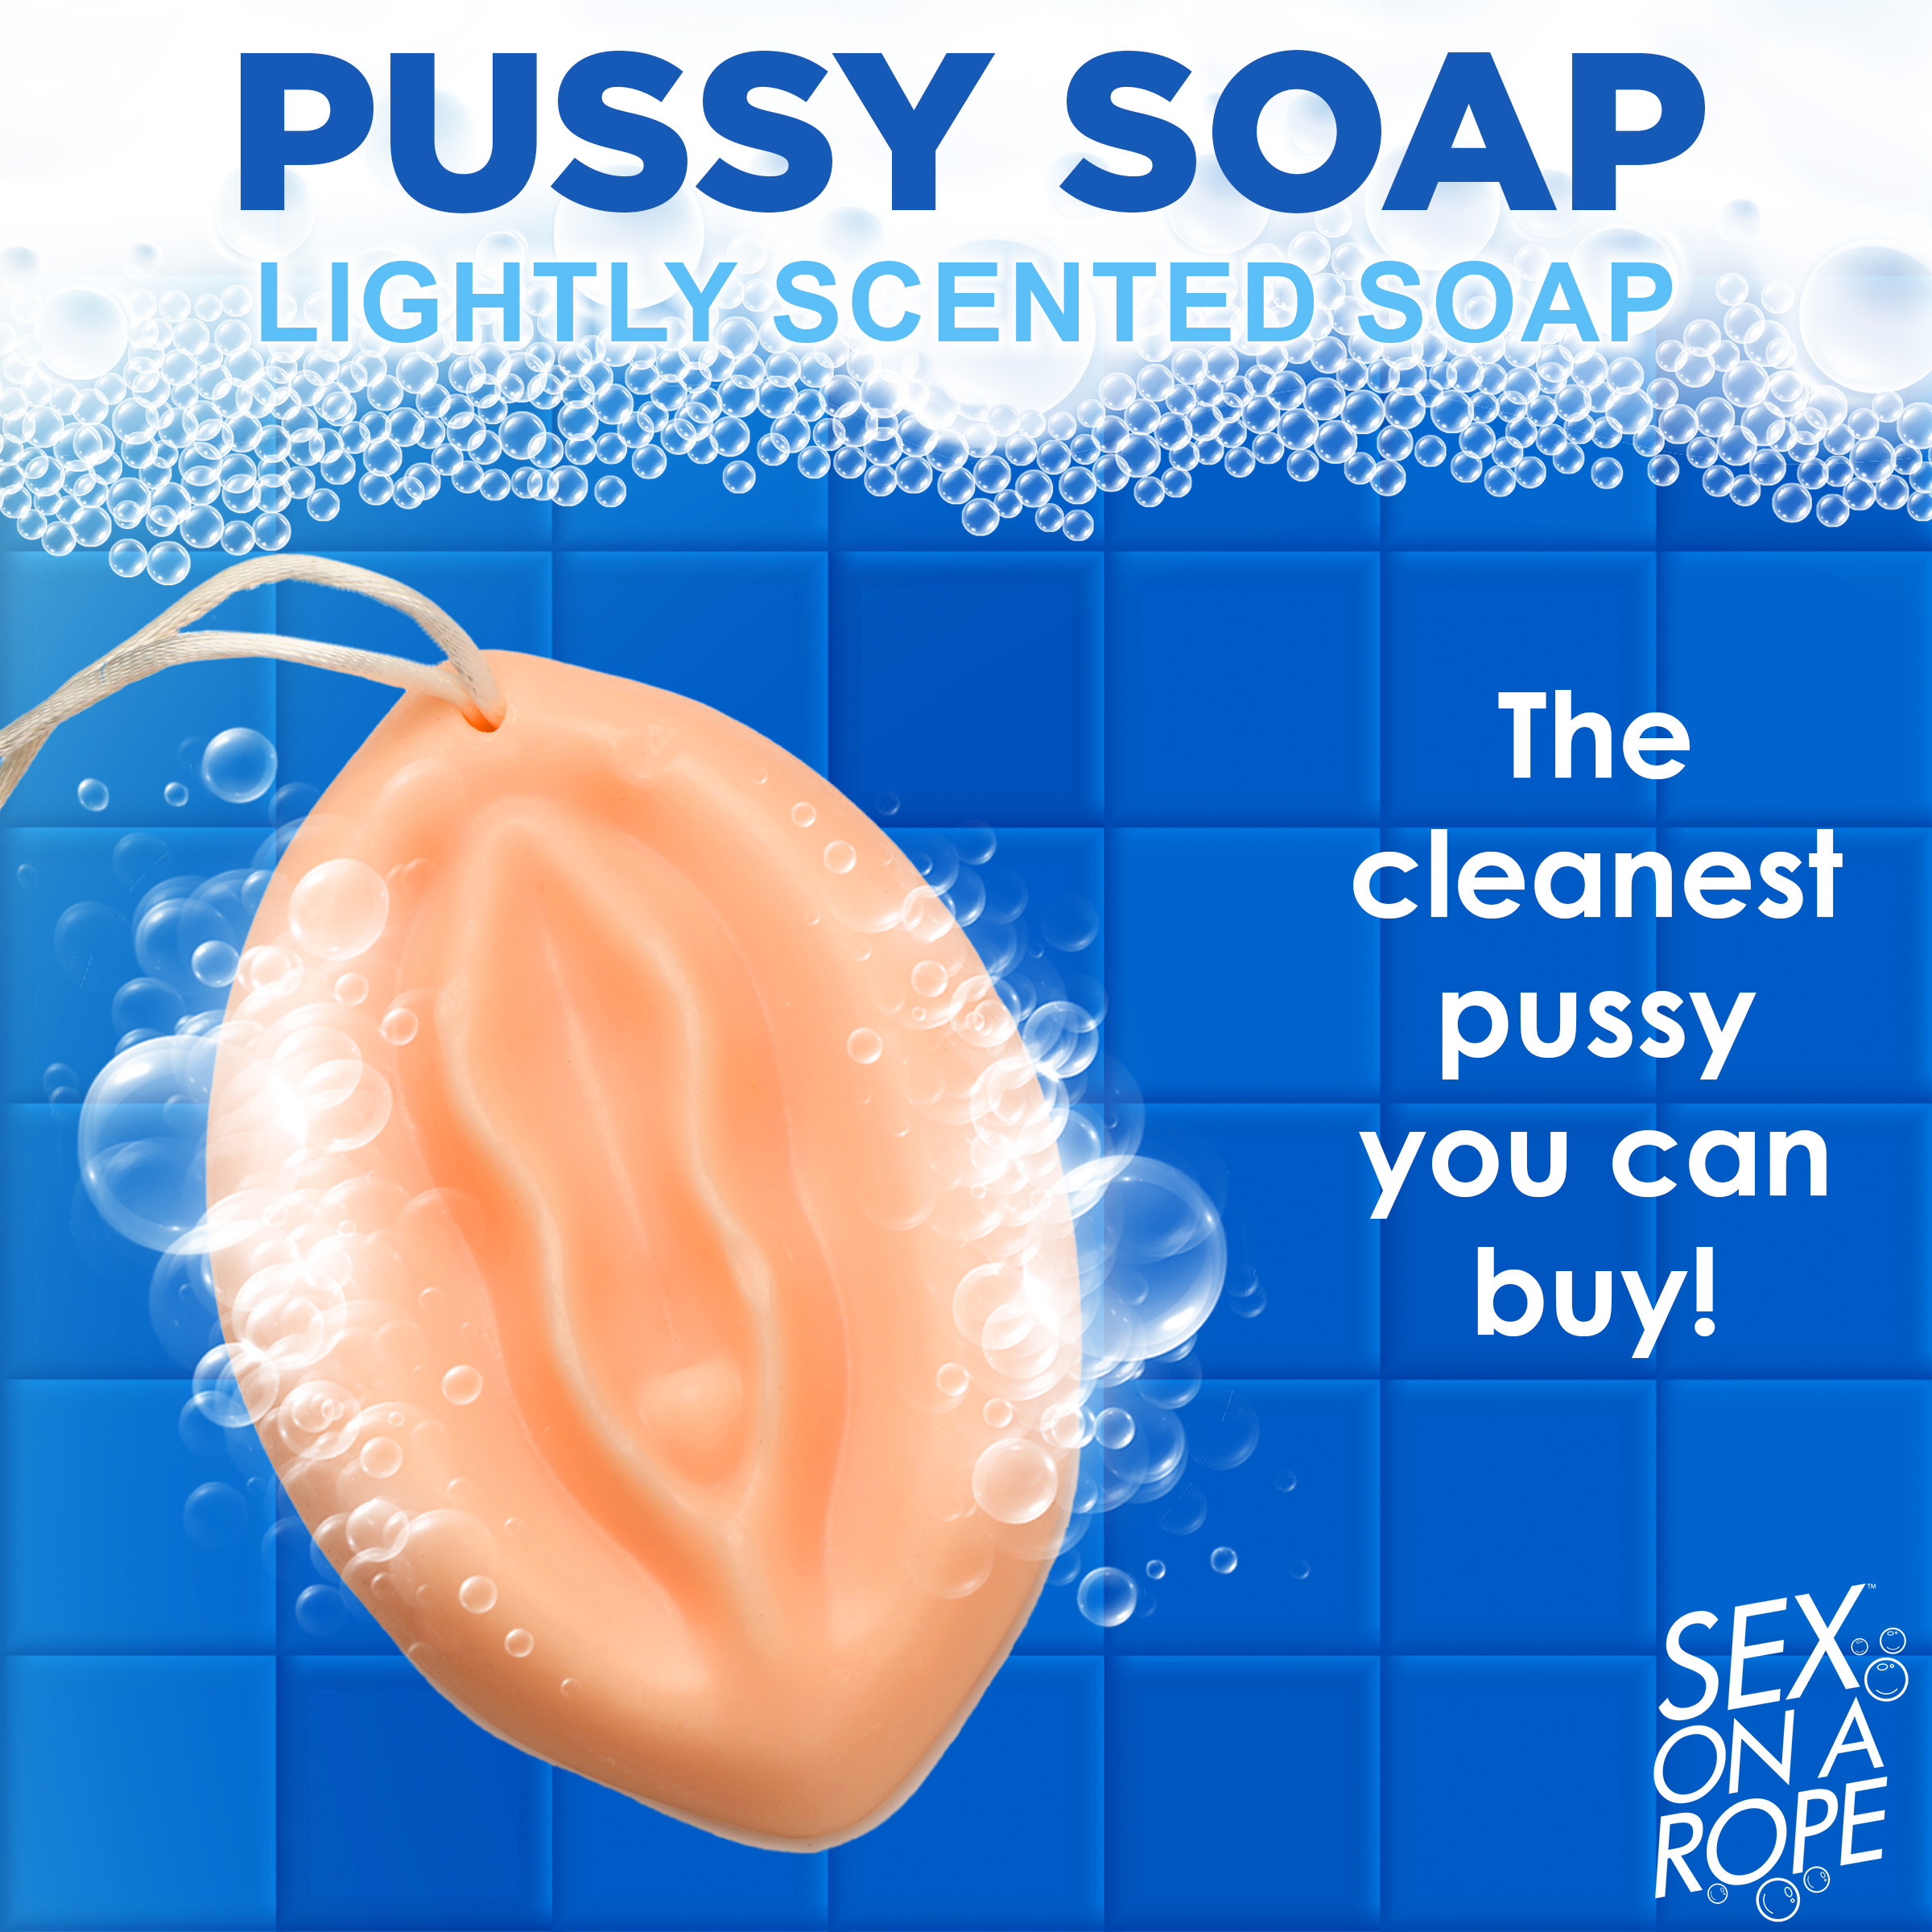 Pussy Soap On A Rope